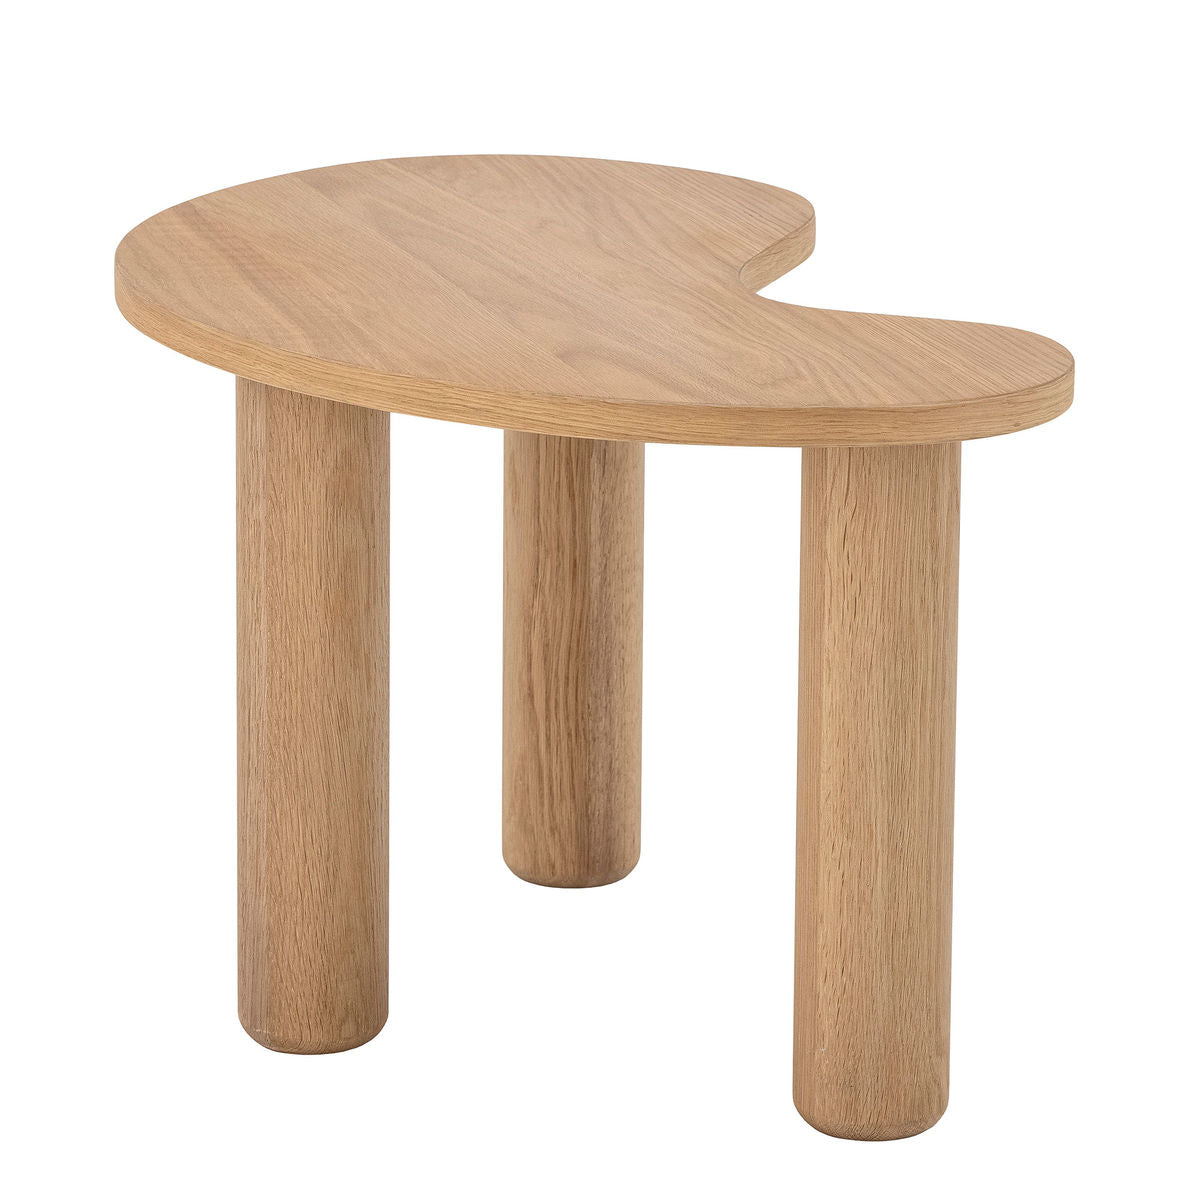 Bloomingville luppa coffee table, nature, rubber tree